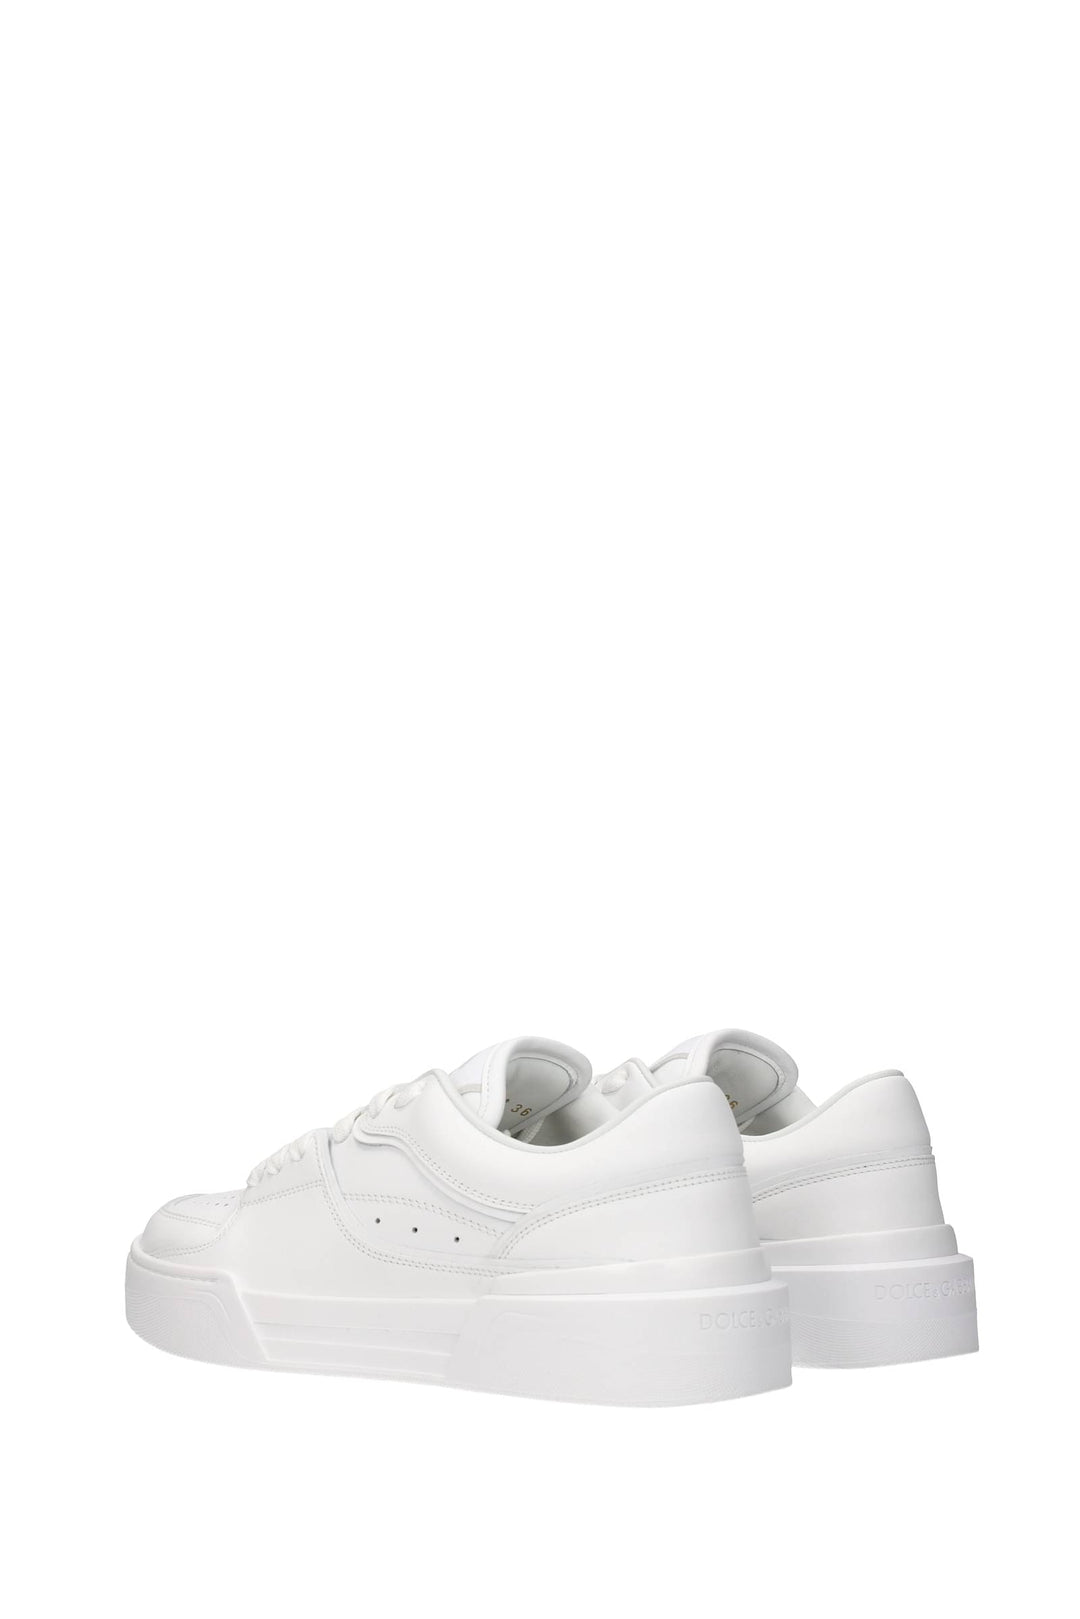 Sneakers Pelle Bianco - Dolce&Gabbana - Donna